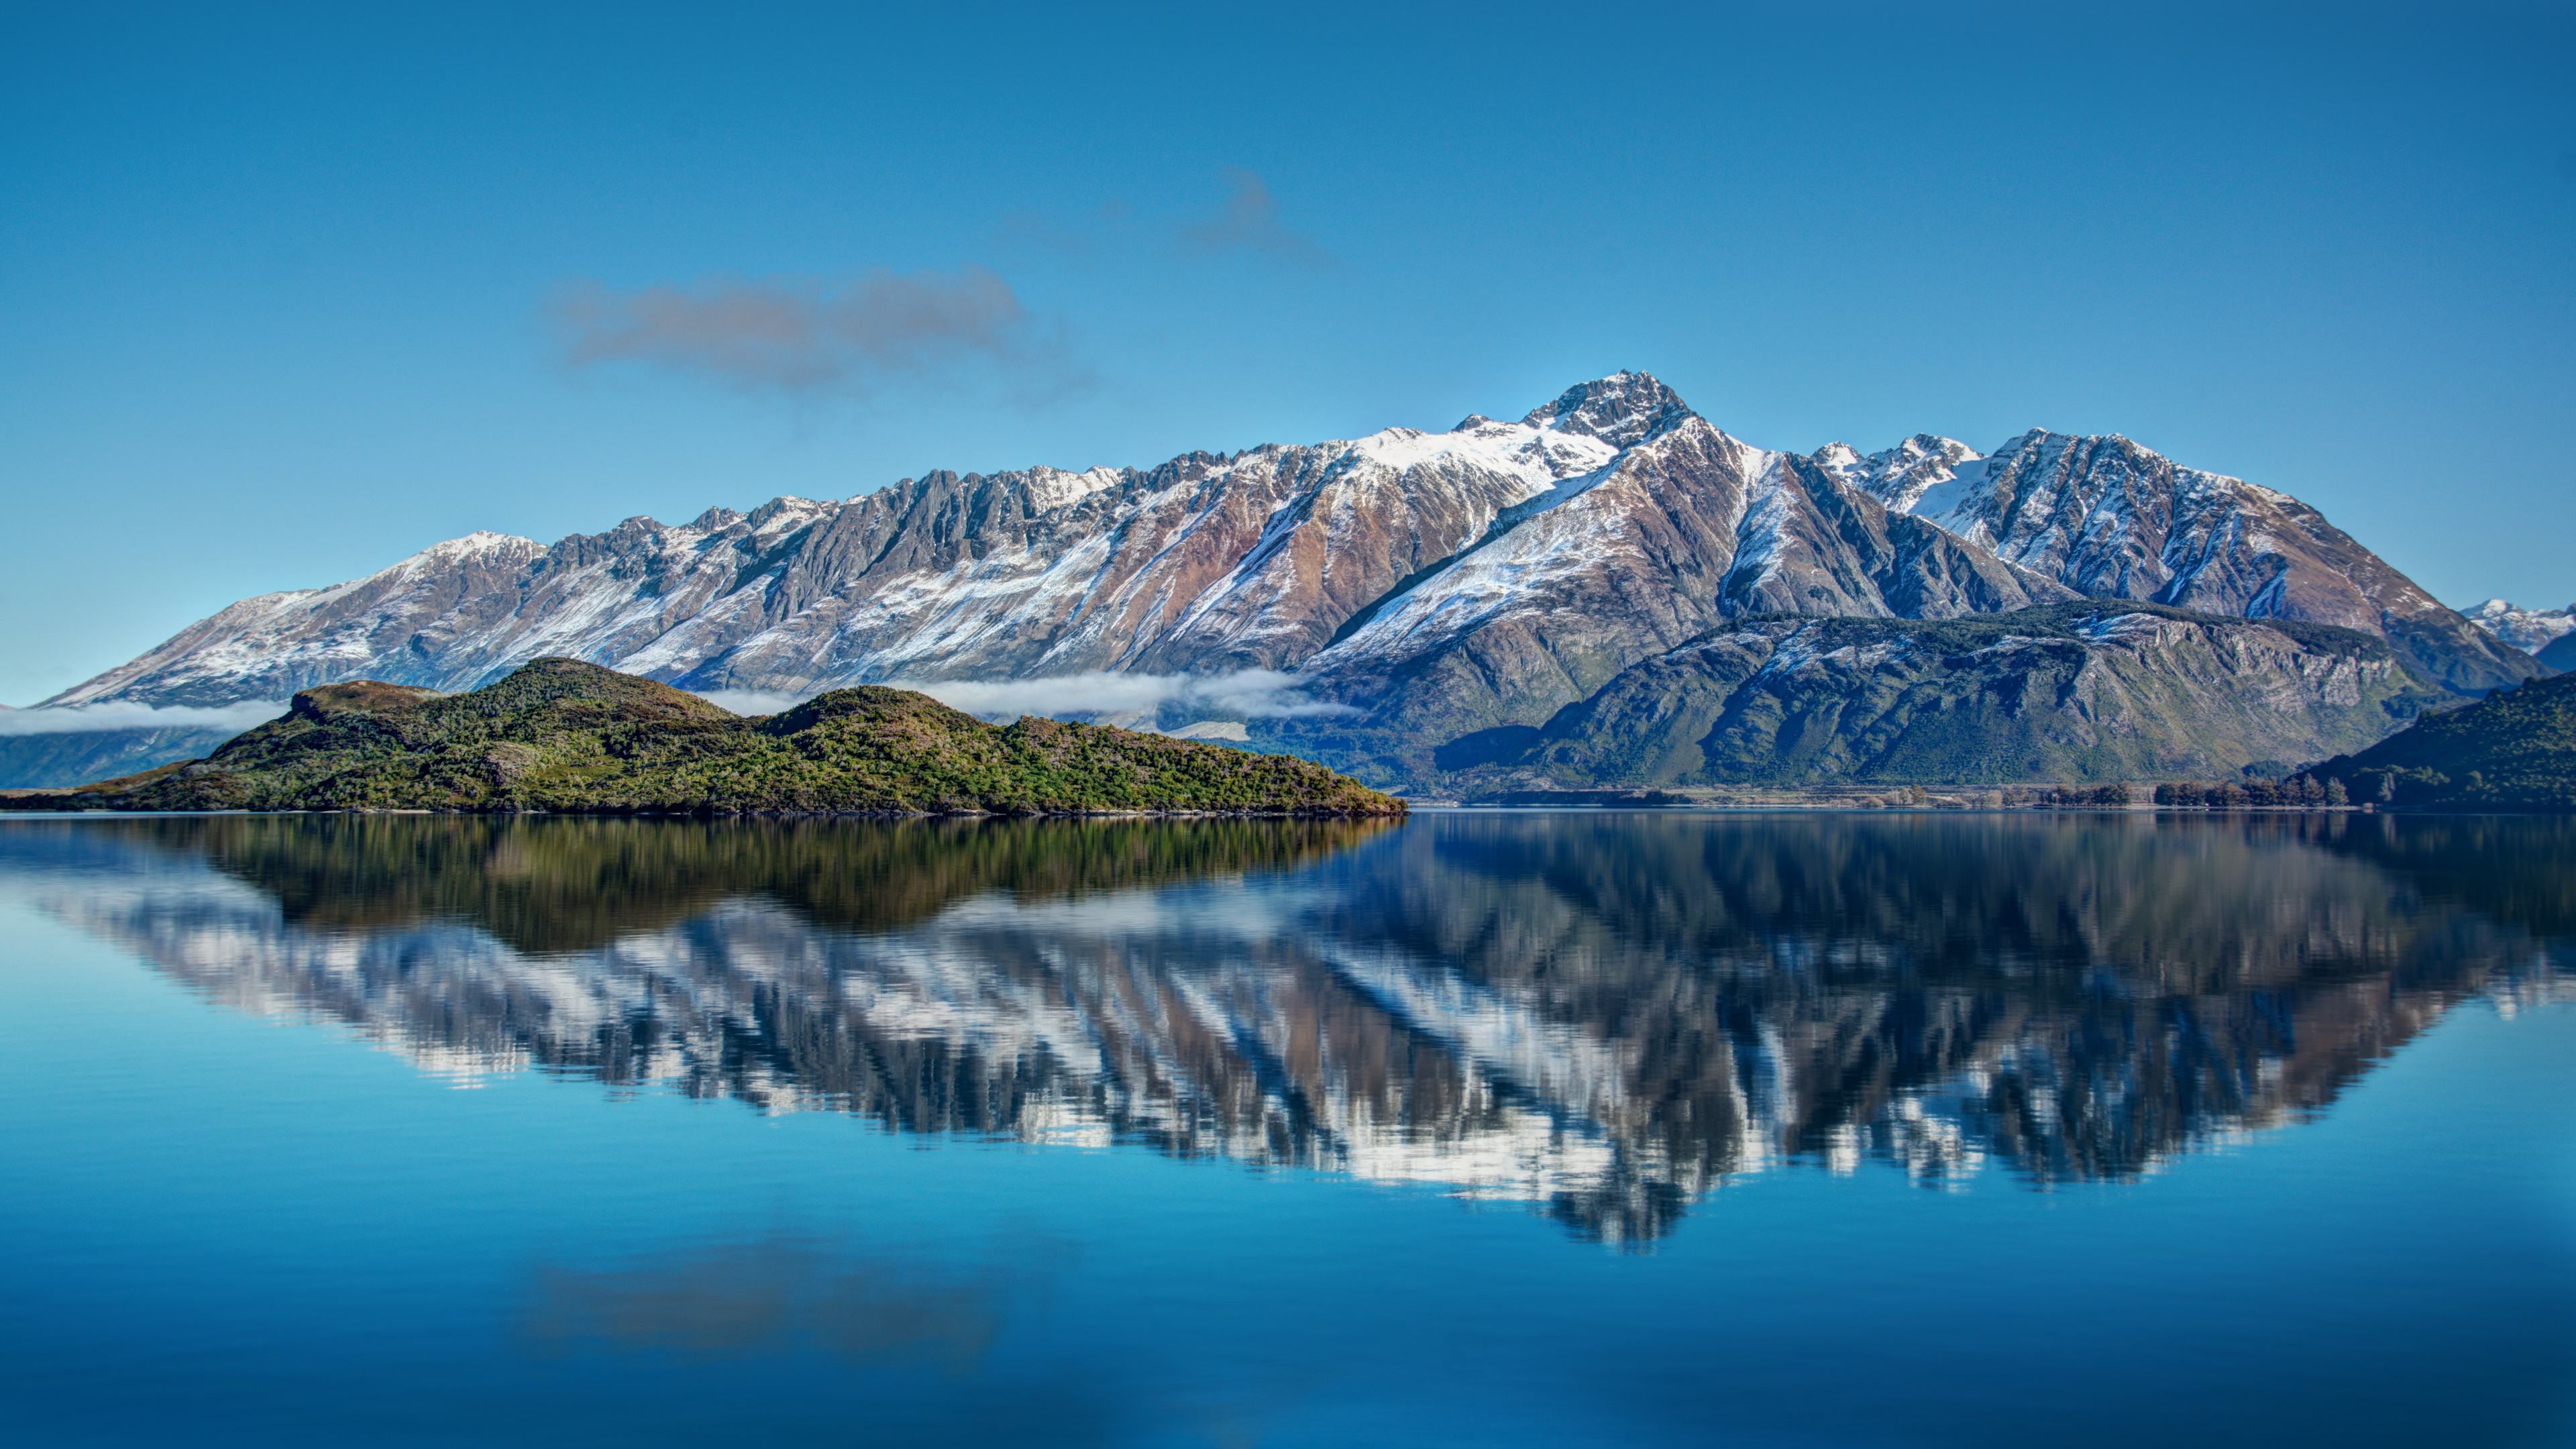 General 3840x2160 landscape 4K New Zealand nature water reflection snow mountains sky